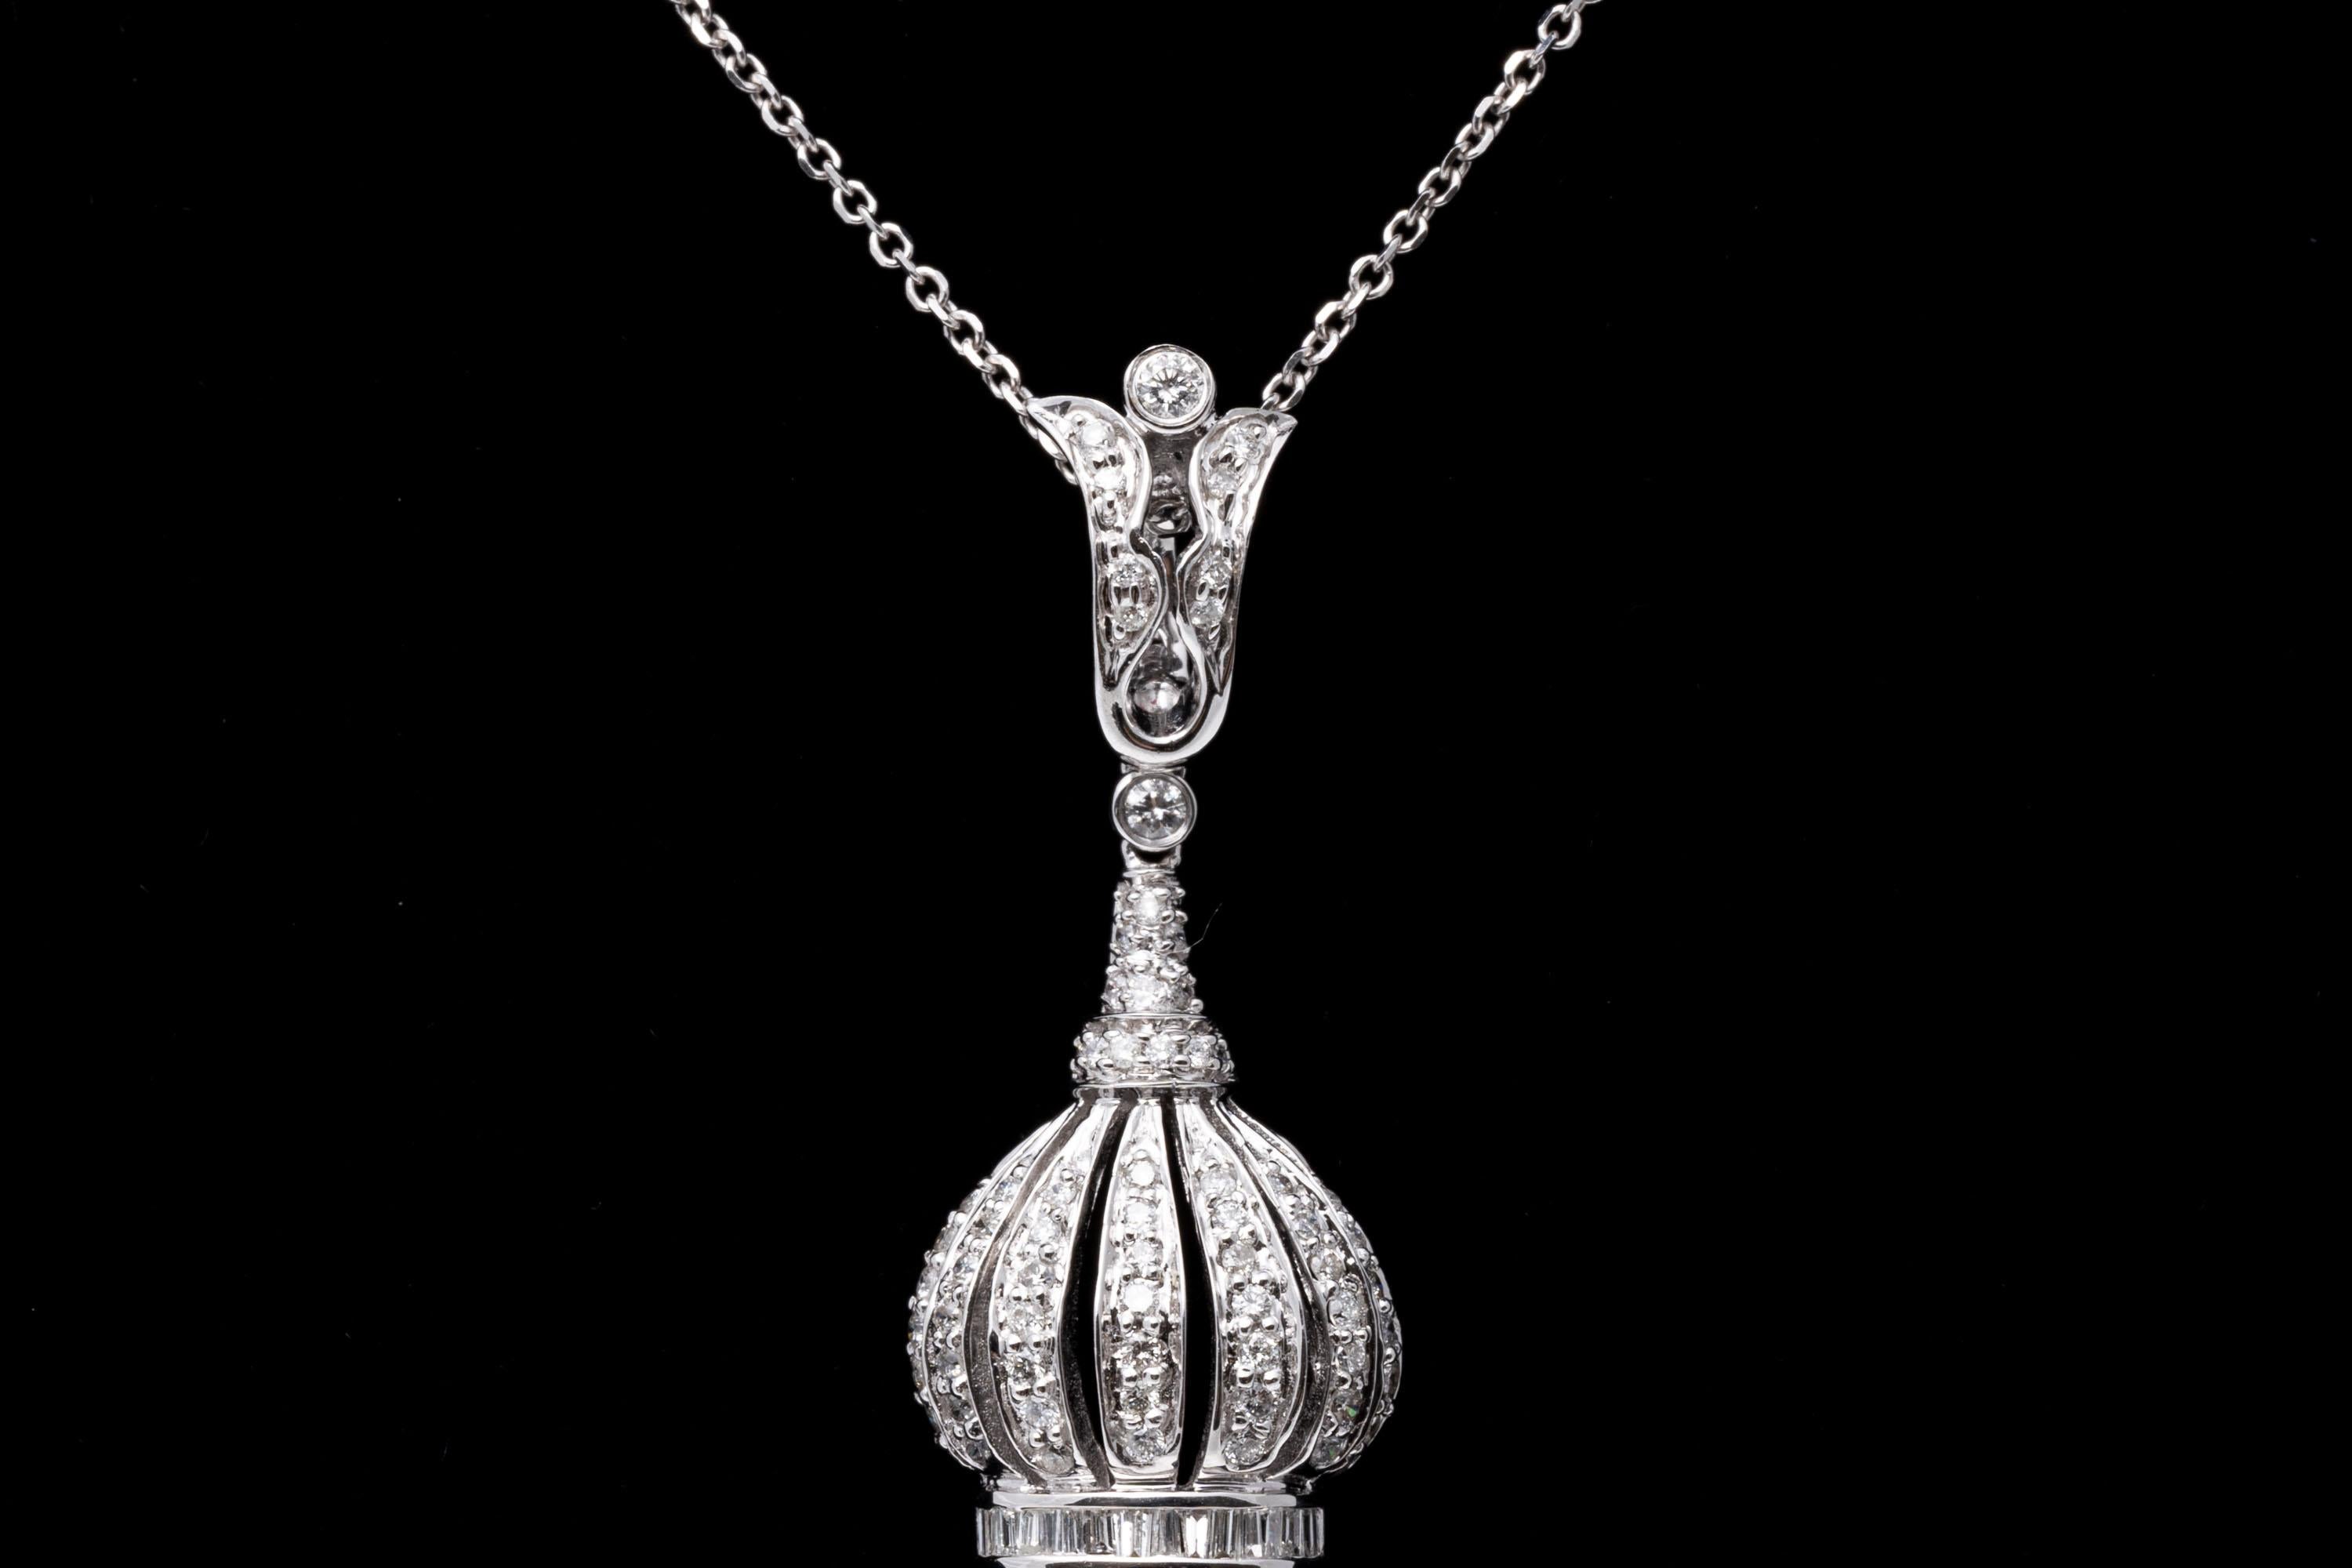 Round Cut 14K Diamond Tasseled Pendant Necklace, With Chain For Sale